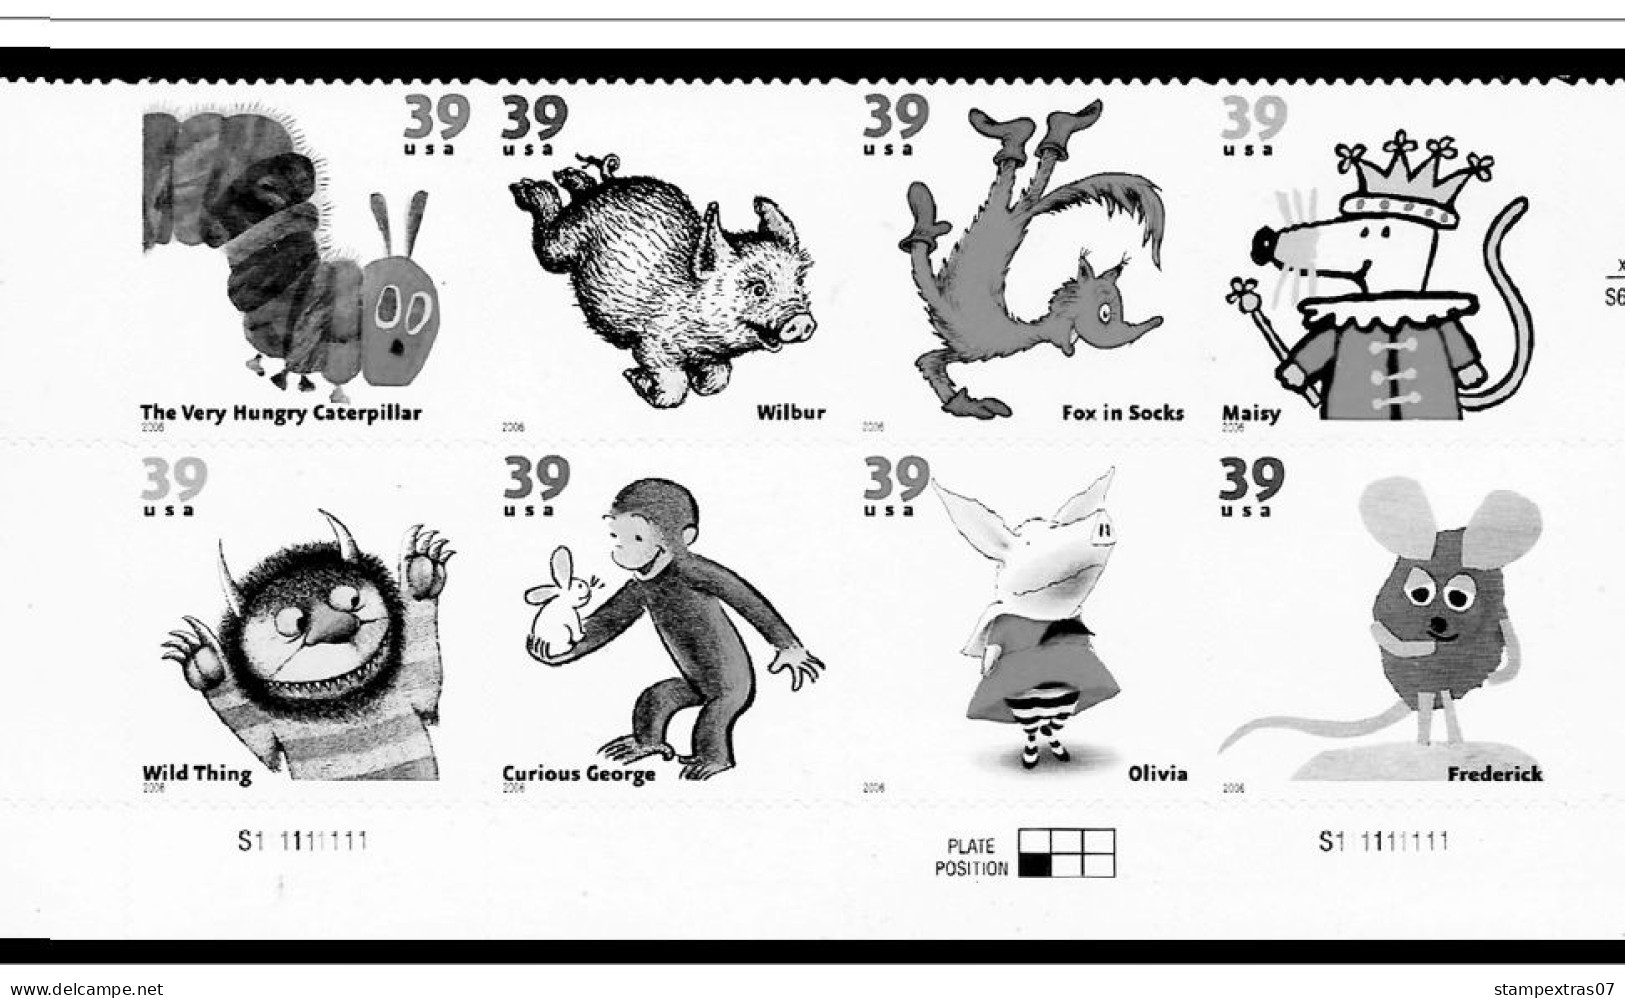 US 2006-2010 PLATE BLOCKS STAMP ALBUM PAGES (51 B&w Illustrated Pages) - Anglais